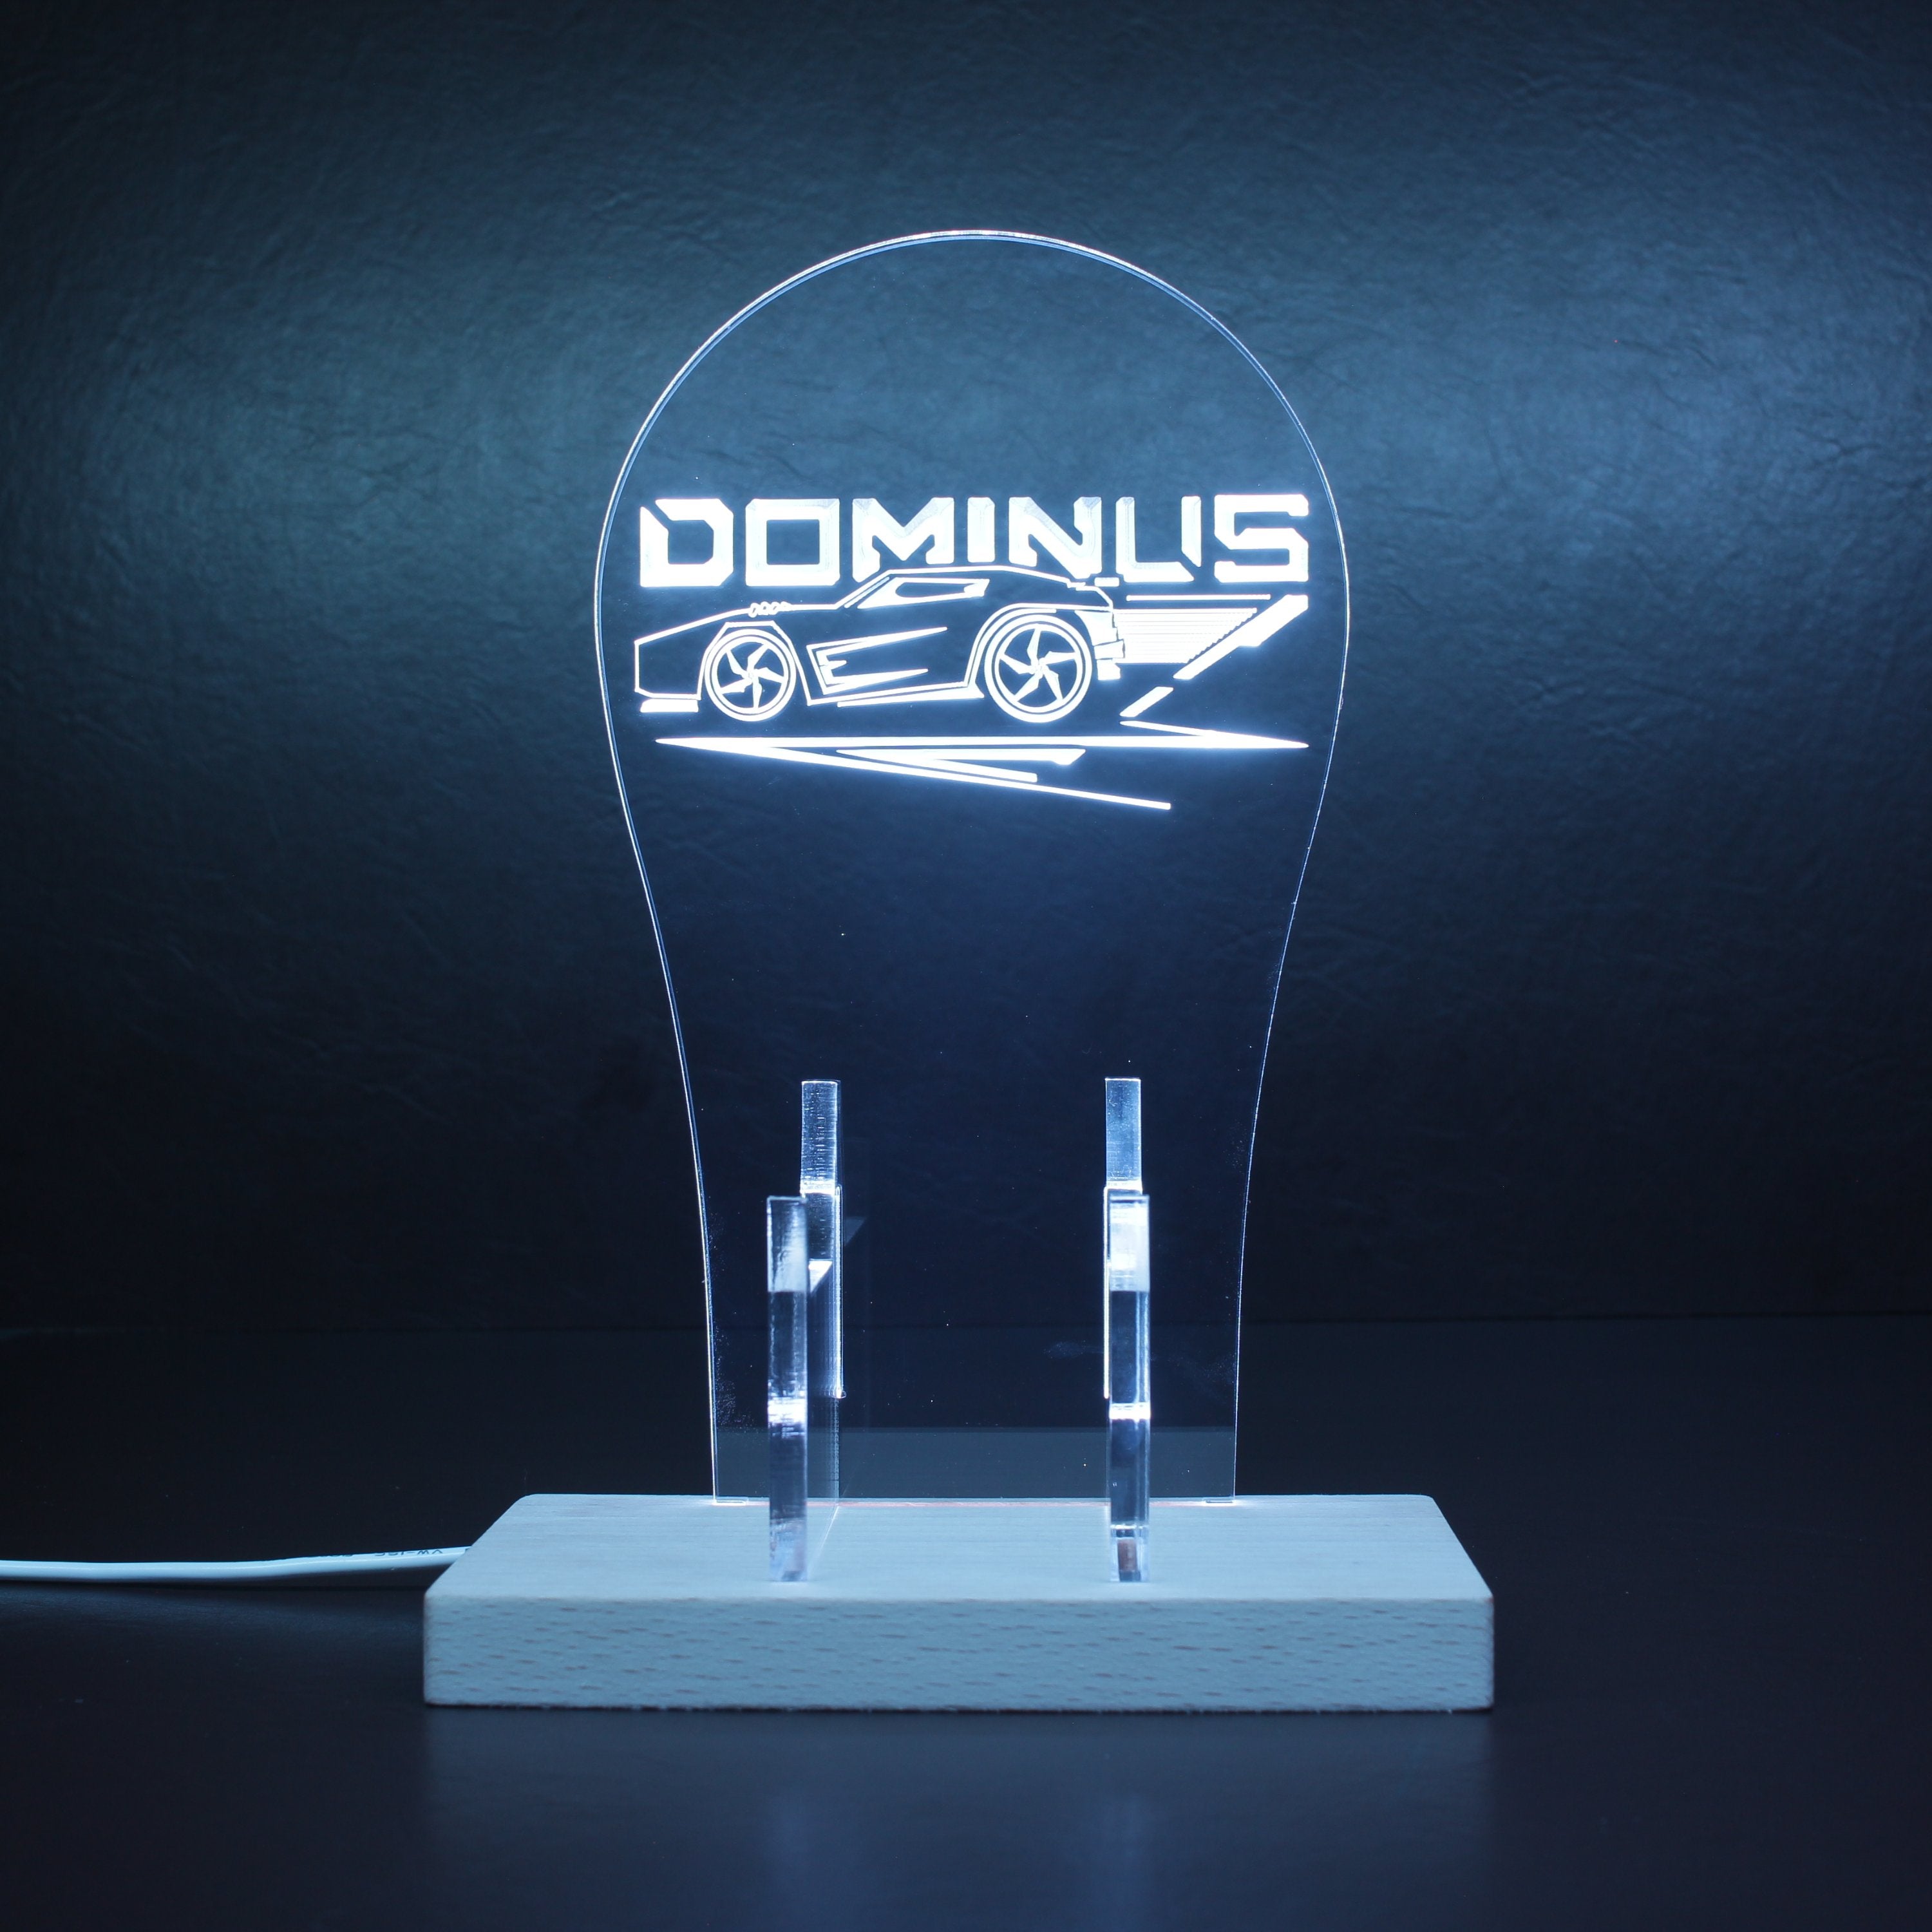 Rocket League Dominus LED Gaming Headset Controller Stand